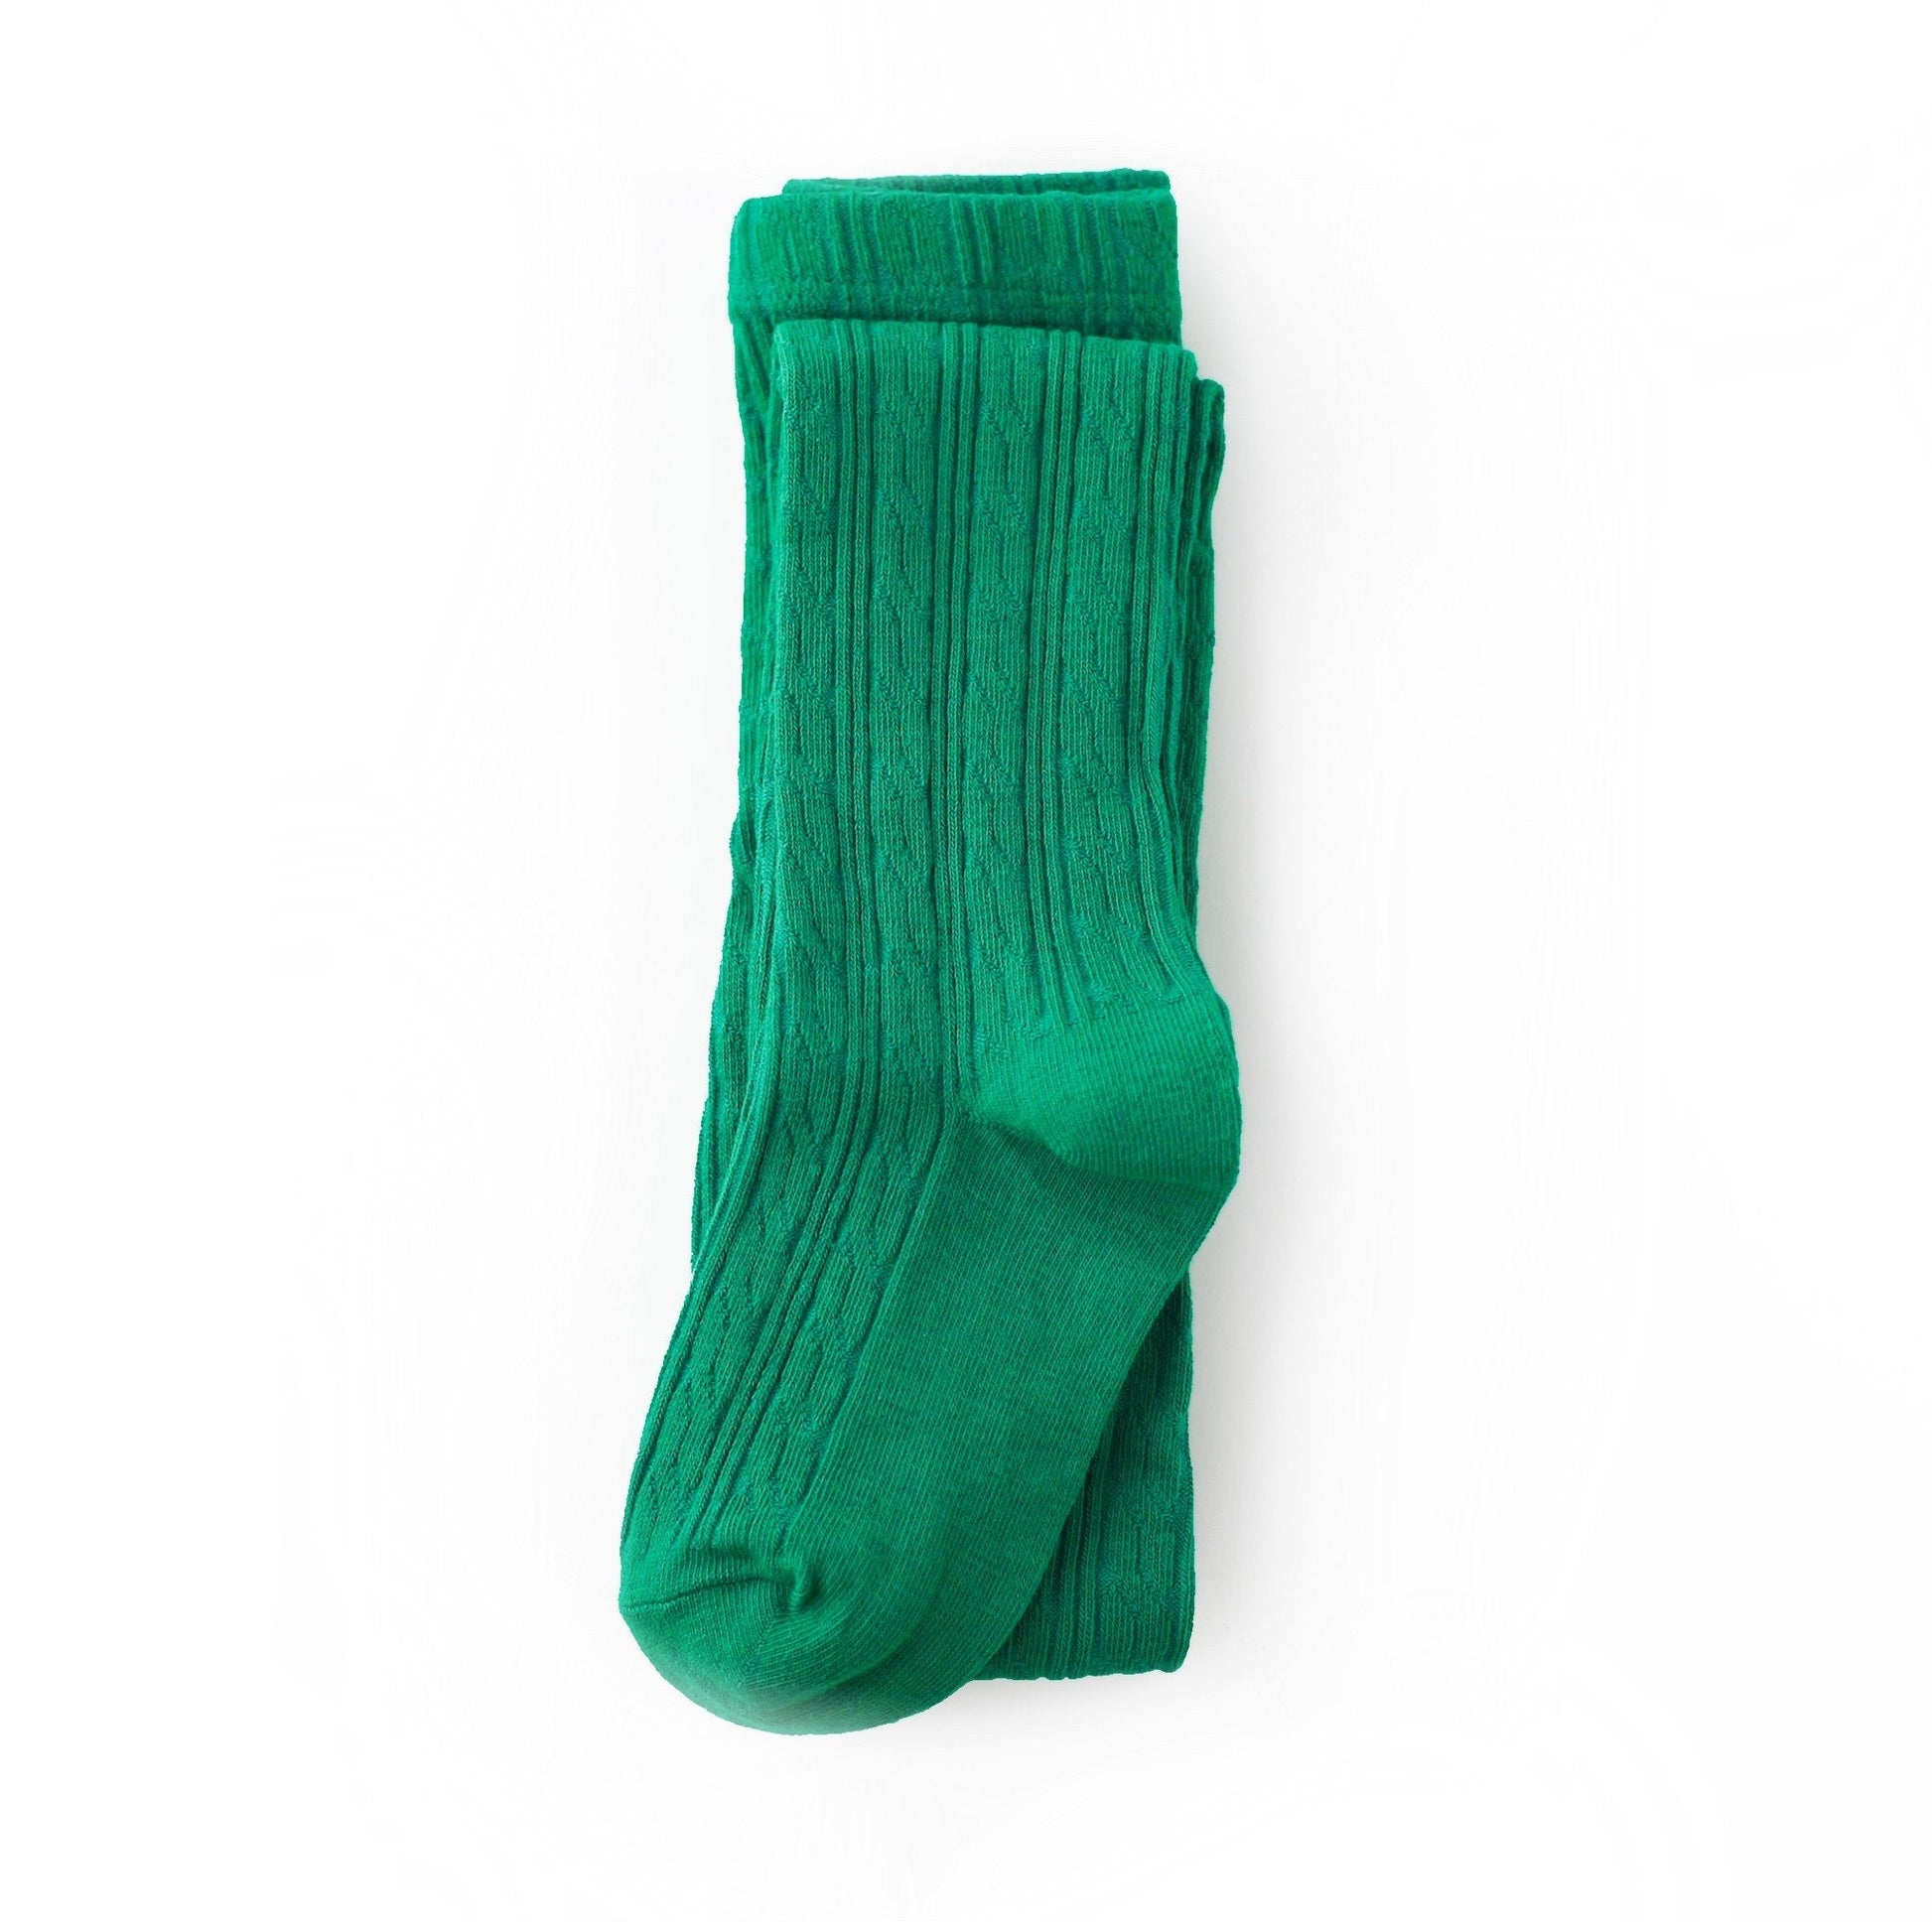 Emerald cable knit tights by little stocking co.